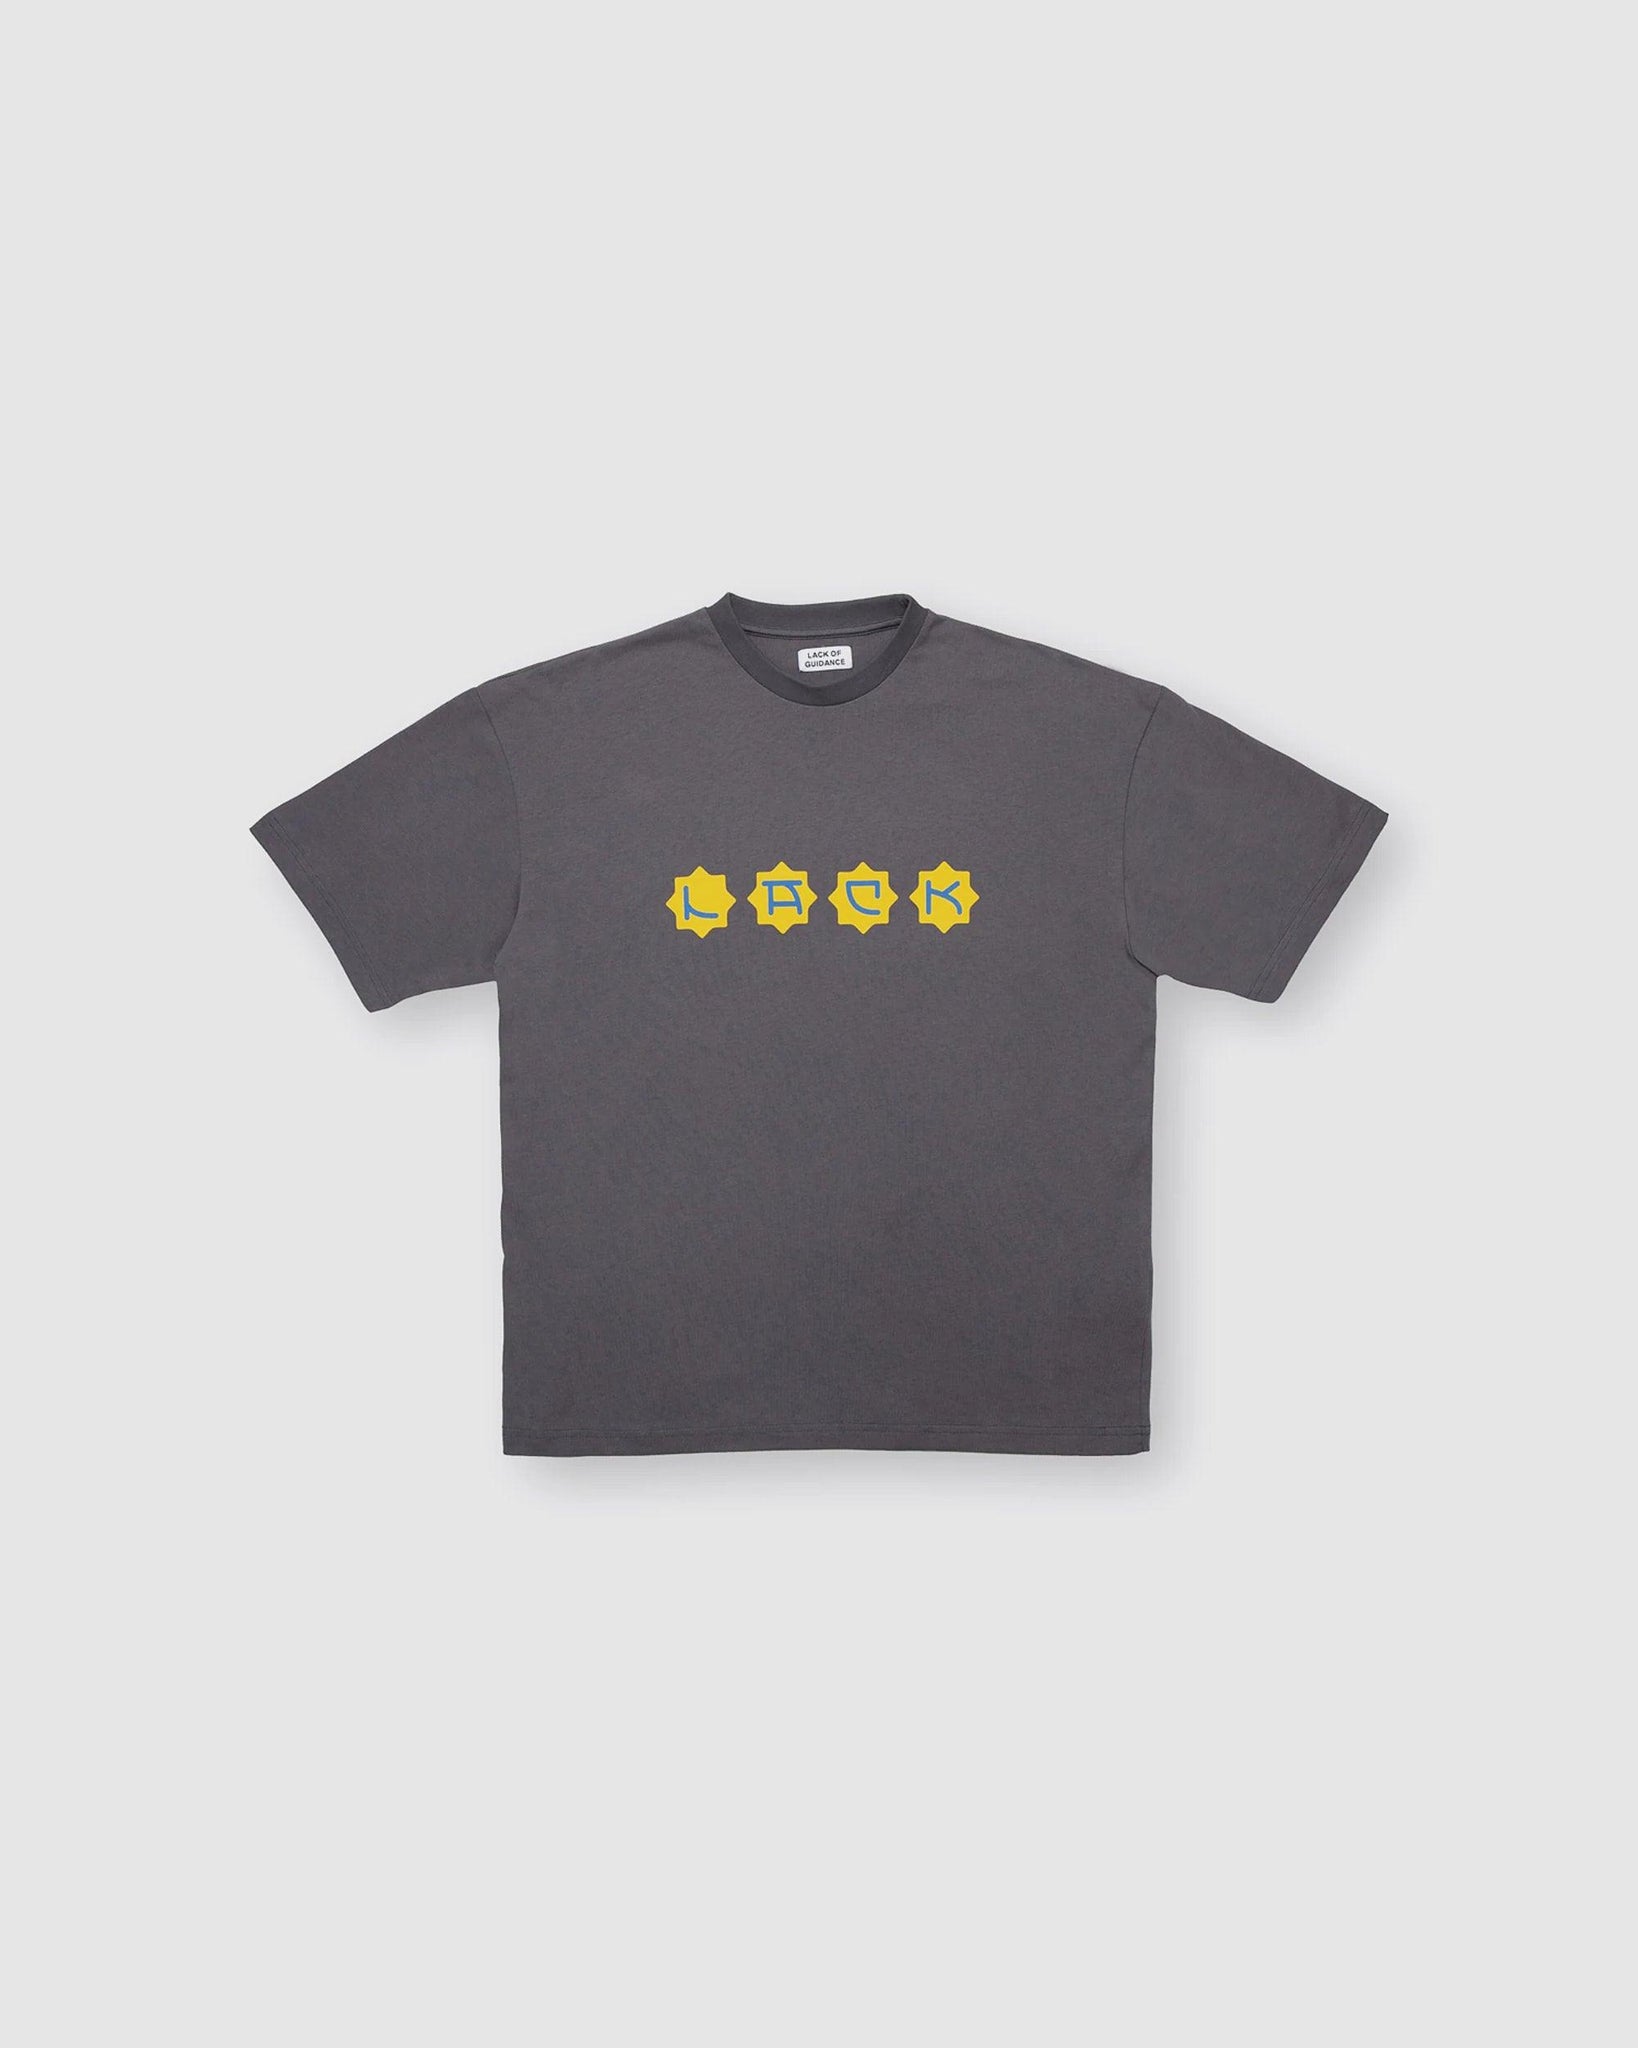 Armando T-Shirt - {{ collection.title }} - Chinatown Country Club 